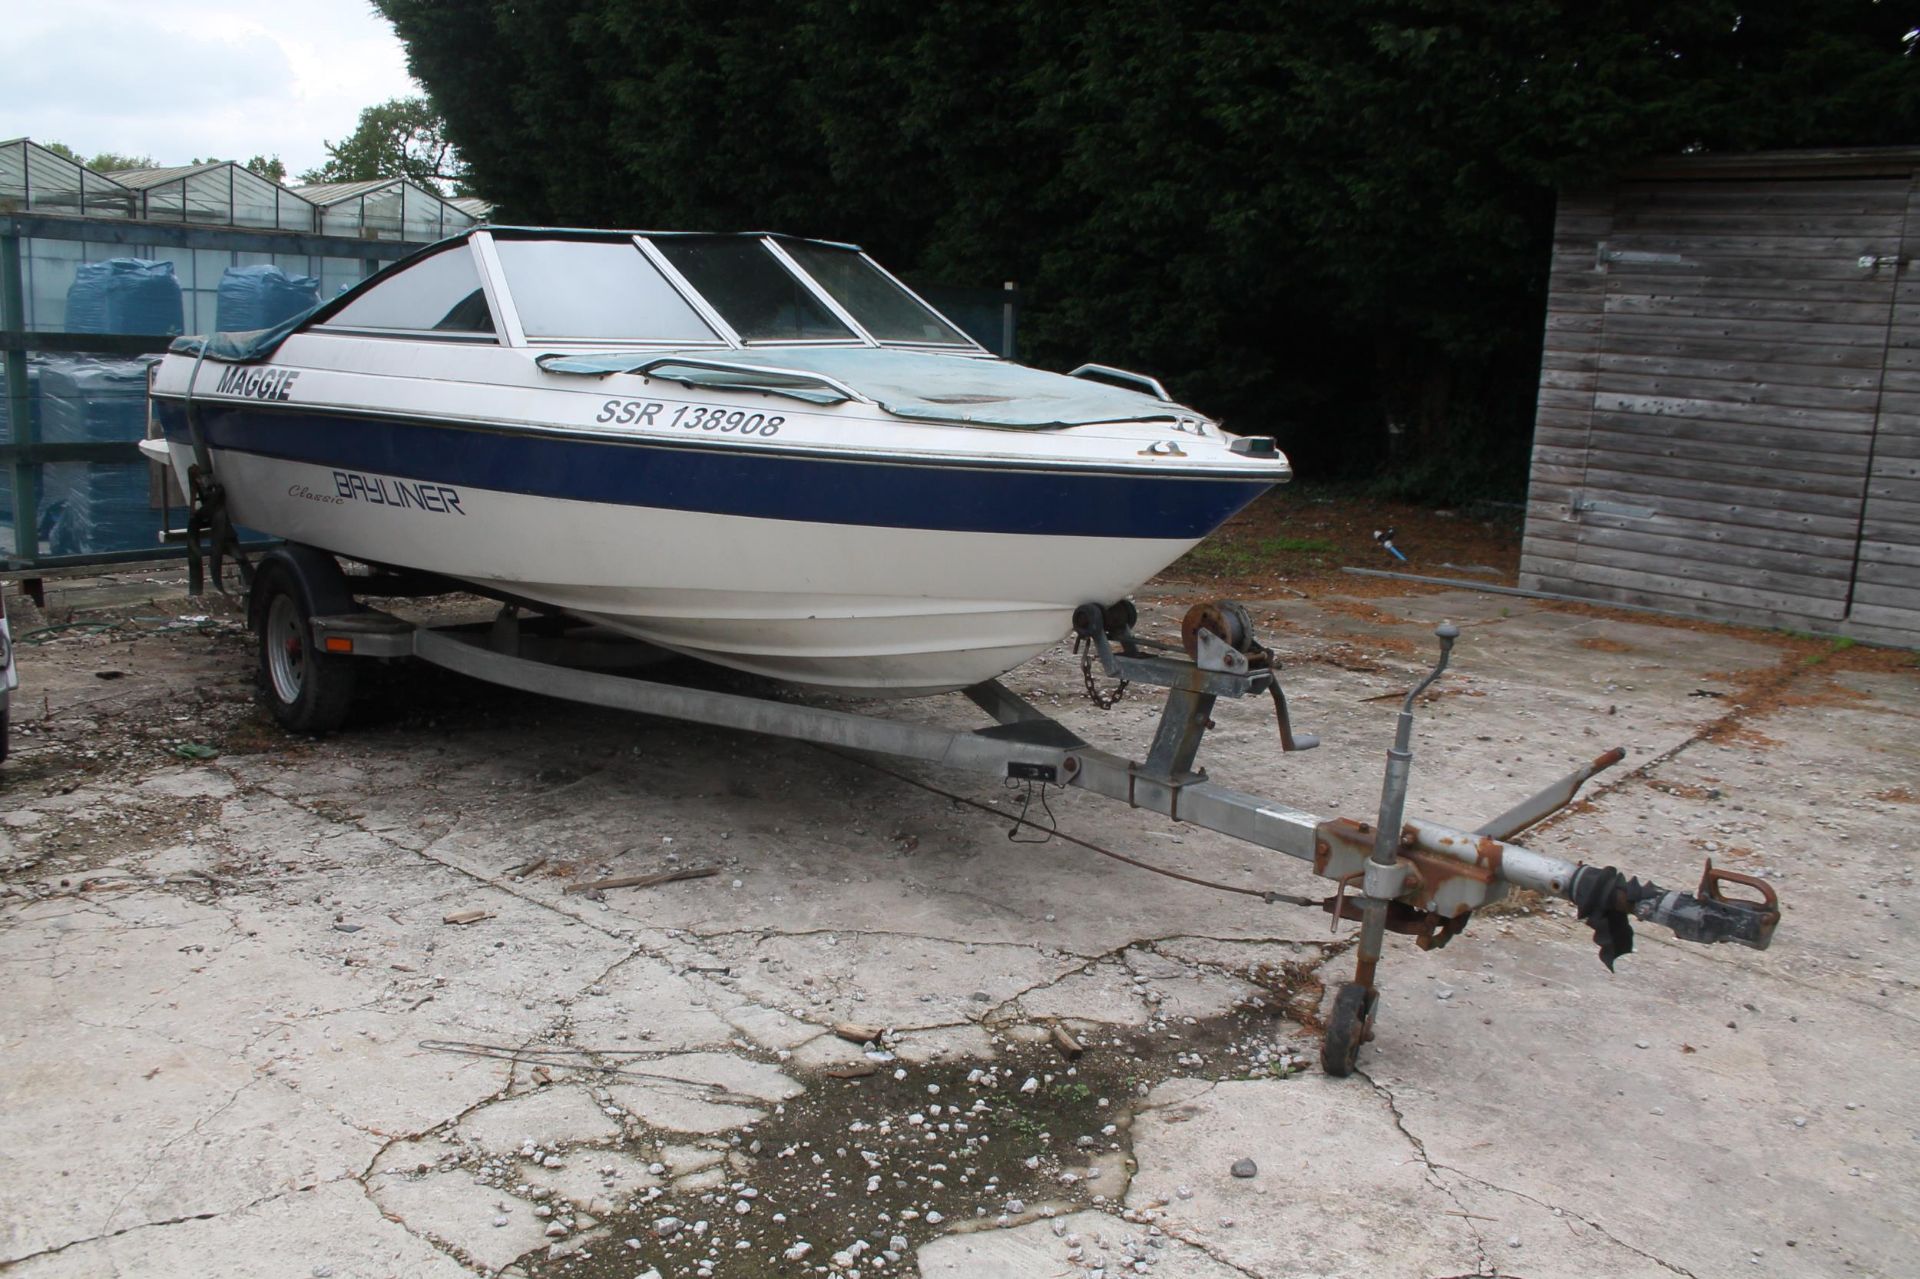 A BAY LINER CLASSIC 5 SEAT BOAT & TRAILER 75HP MERCURY OM BOARD ENGINE BELIEVED WORKING BUT NOT USED